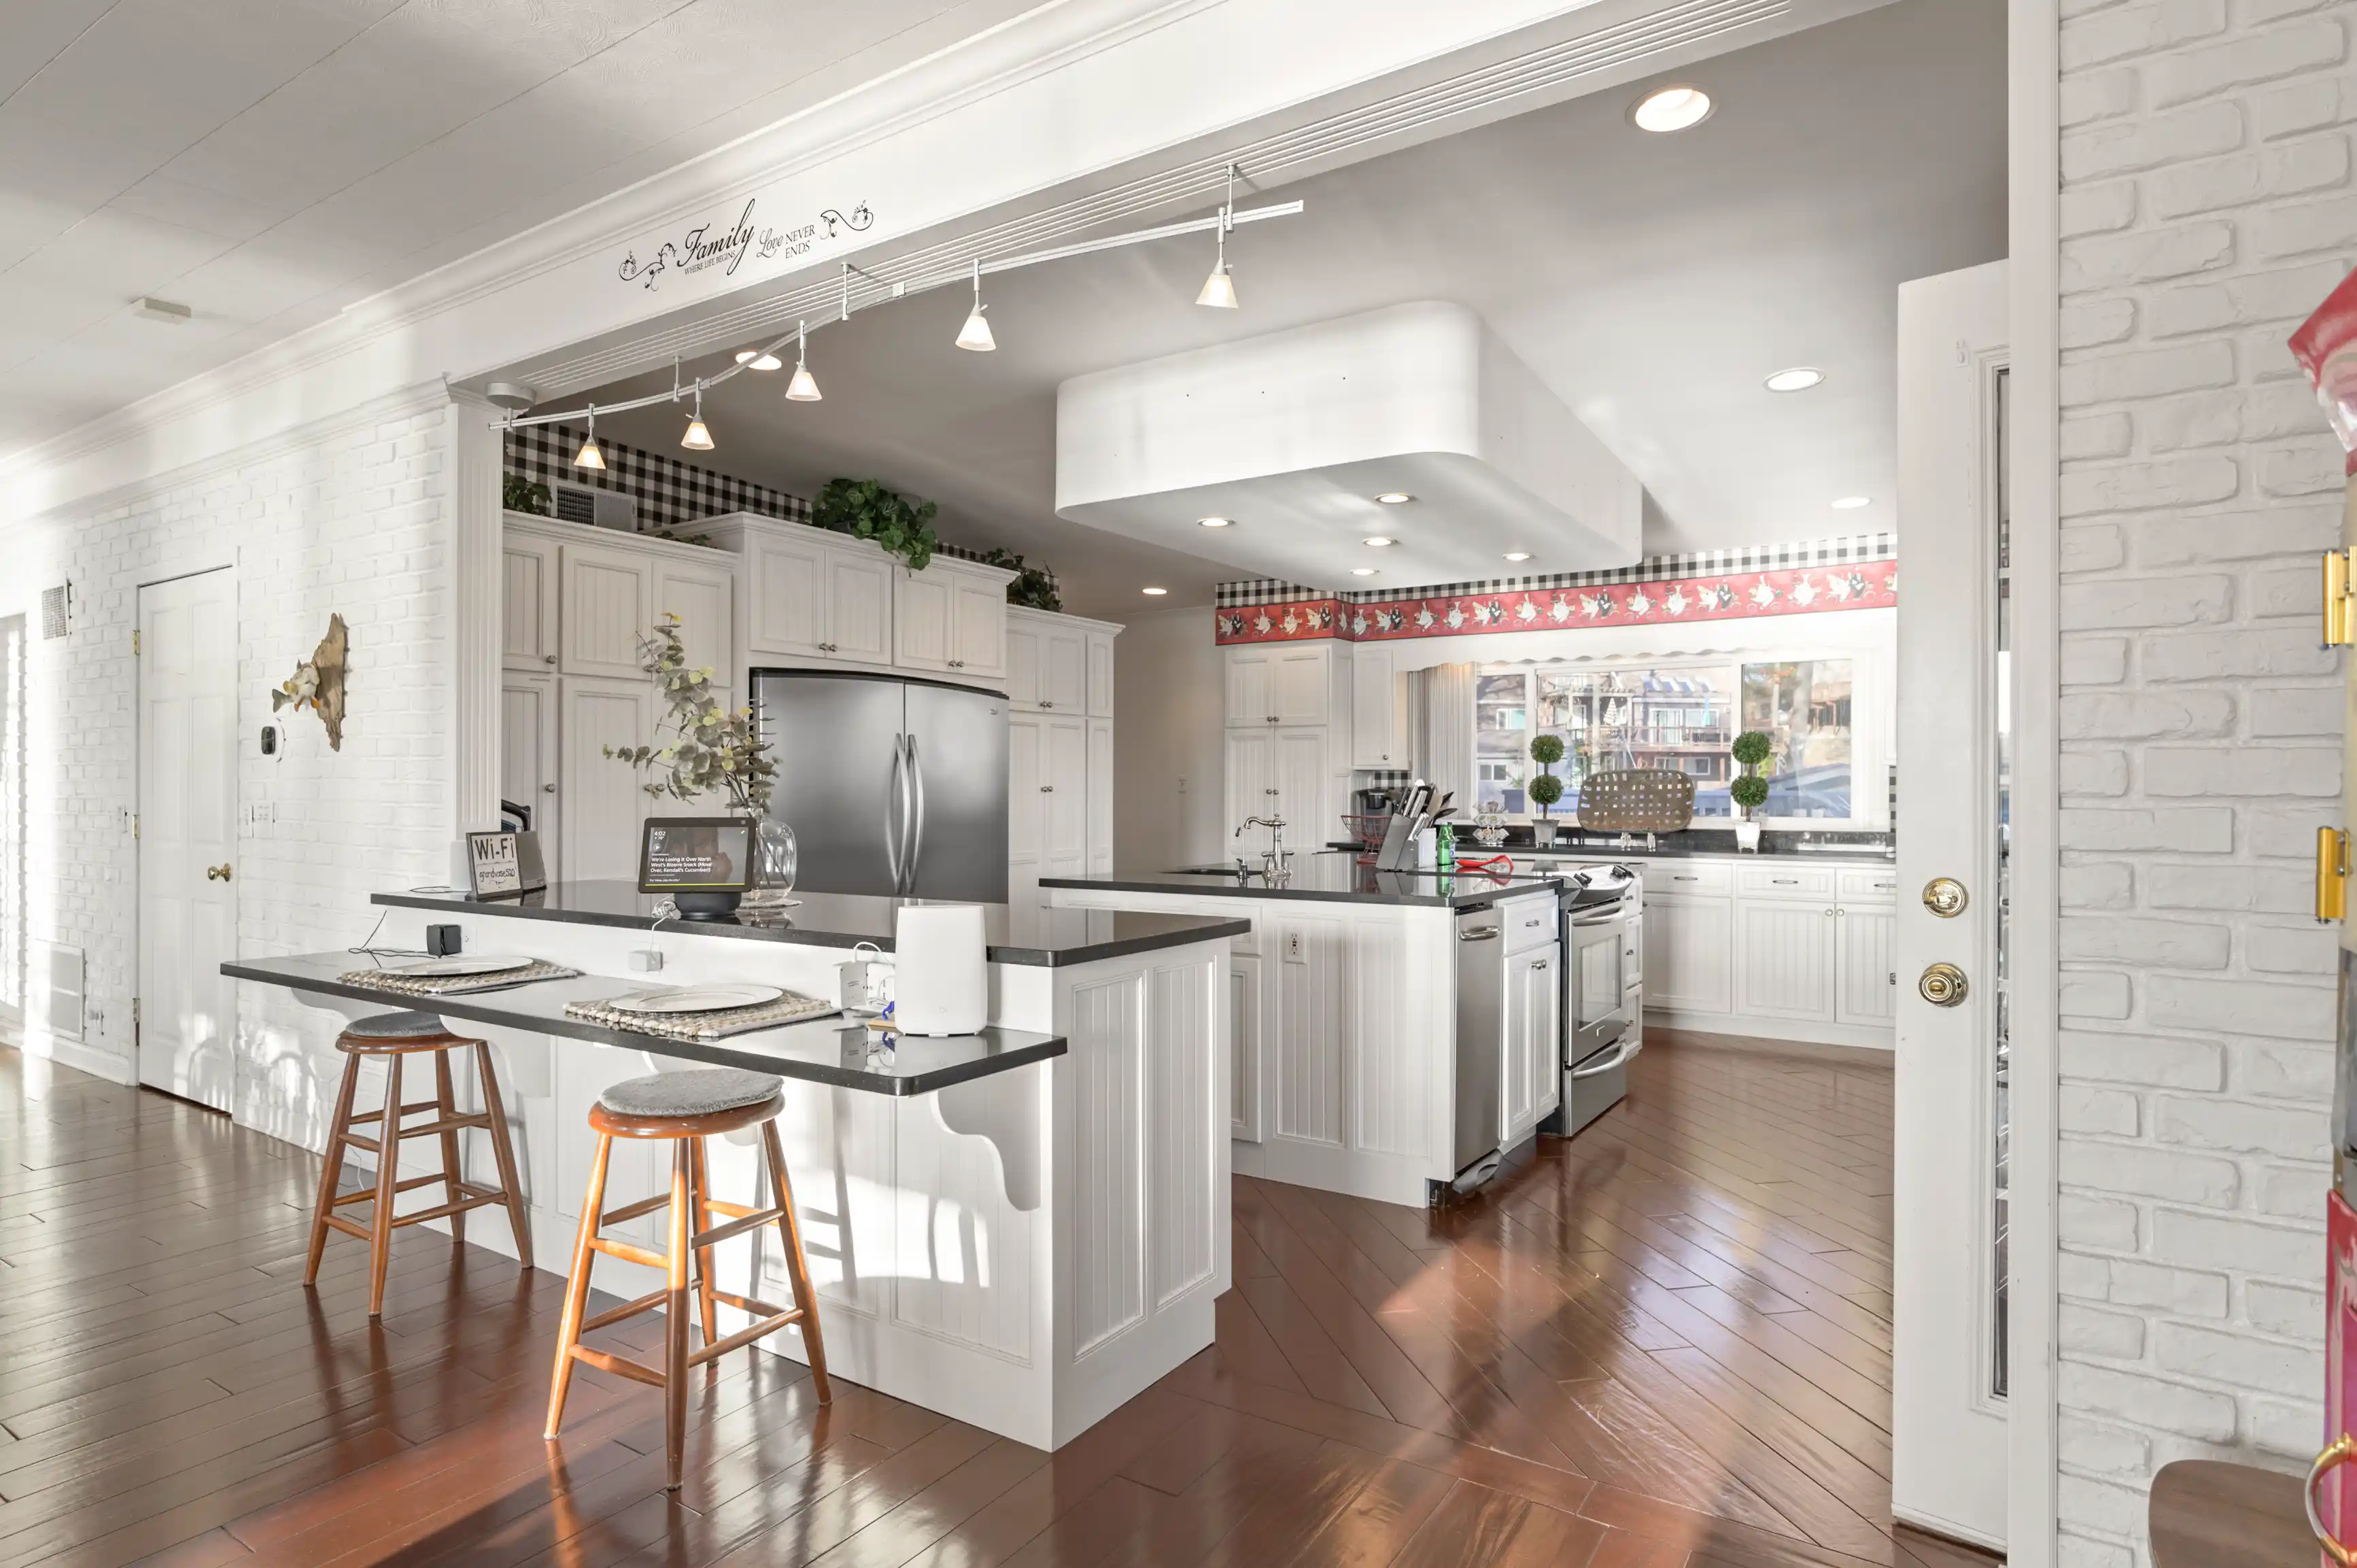 Bright and spacious kitchen interior with white cabinetry, stainless steel appliances, a central island with bar stools, and hardwood flooring.